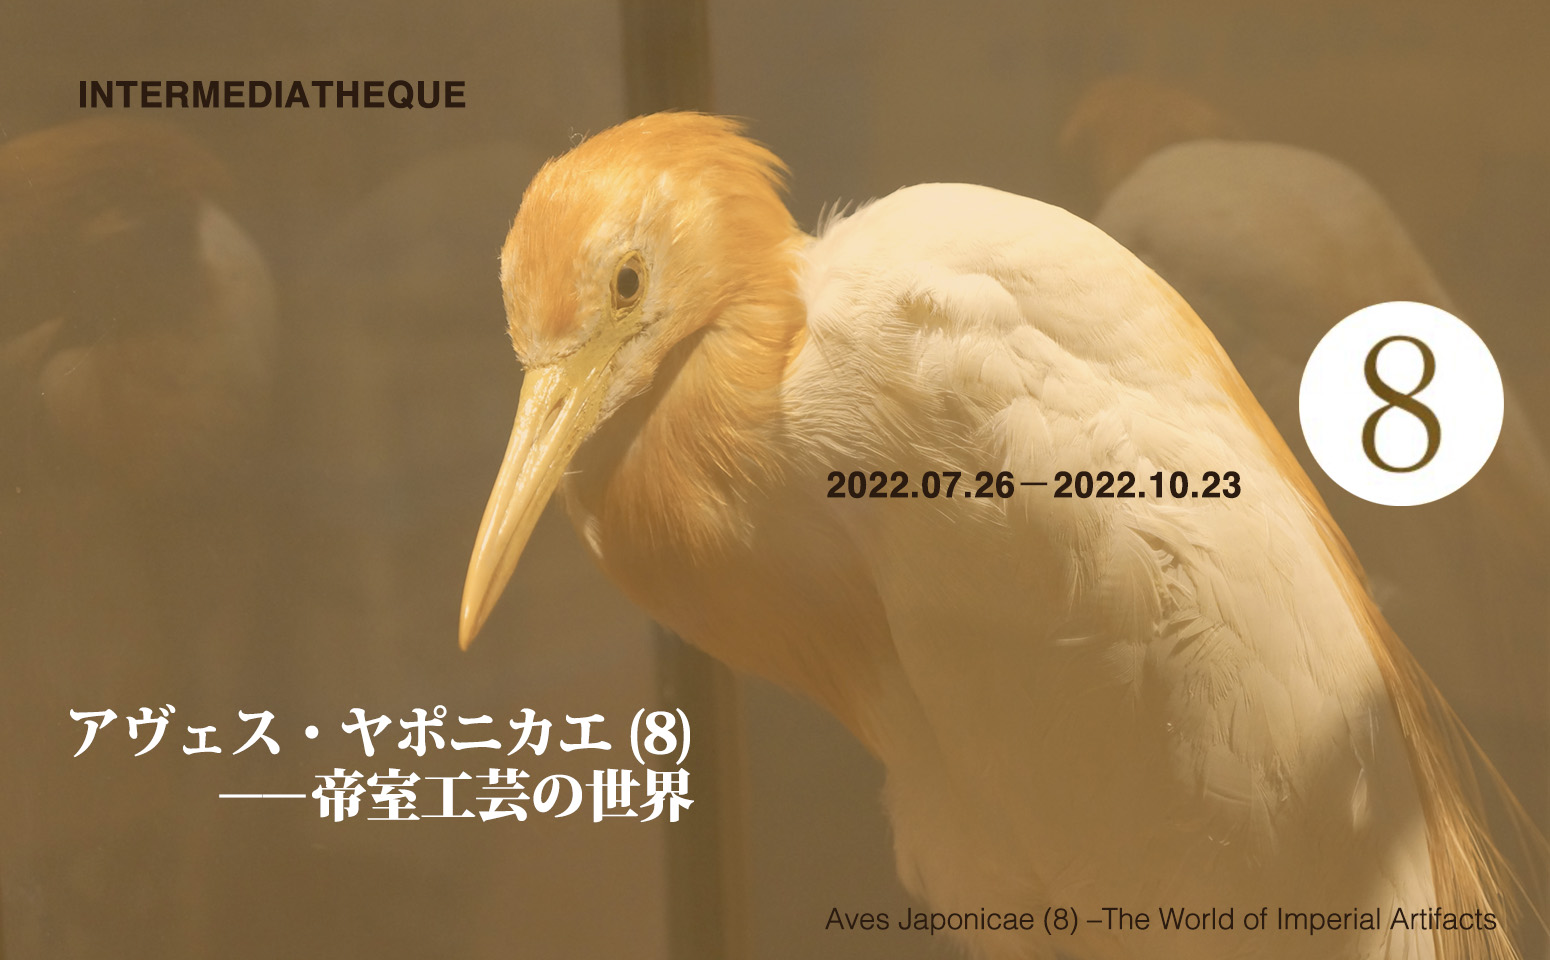 Special Exhibition “Aves Japonicae〈8〉 - The World of Imperial Artifacts”